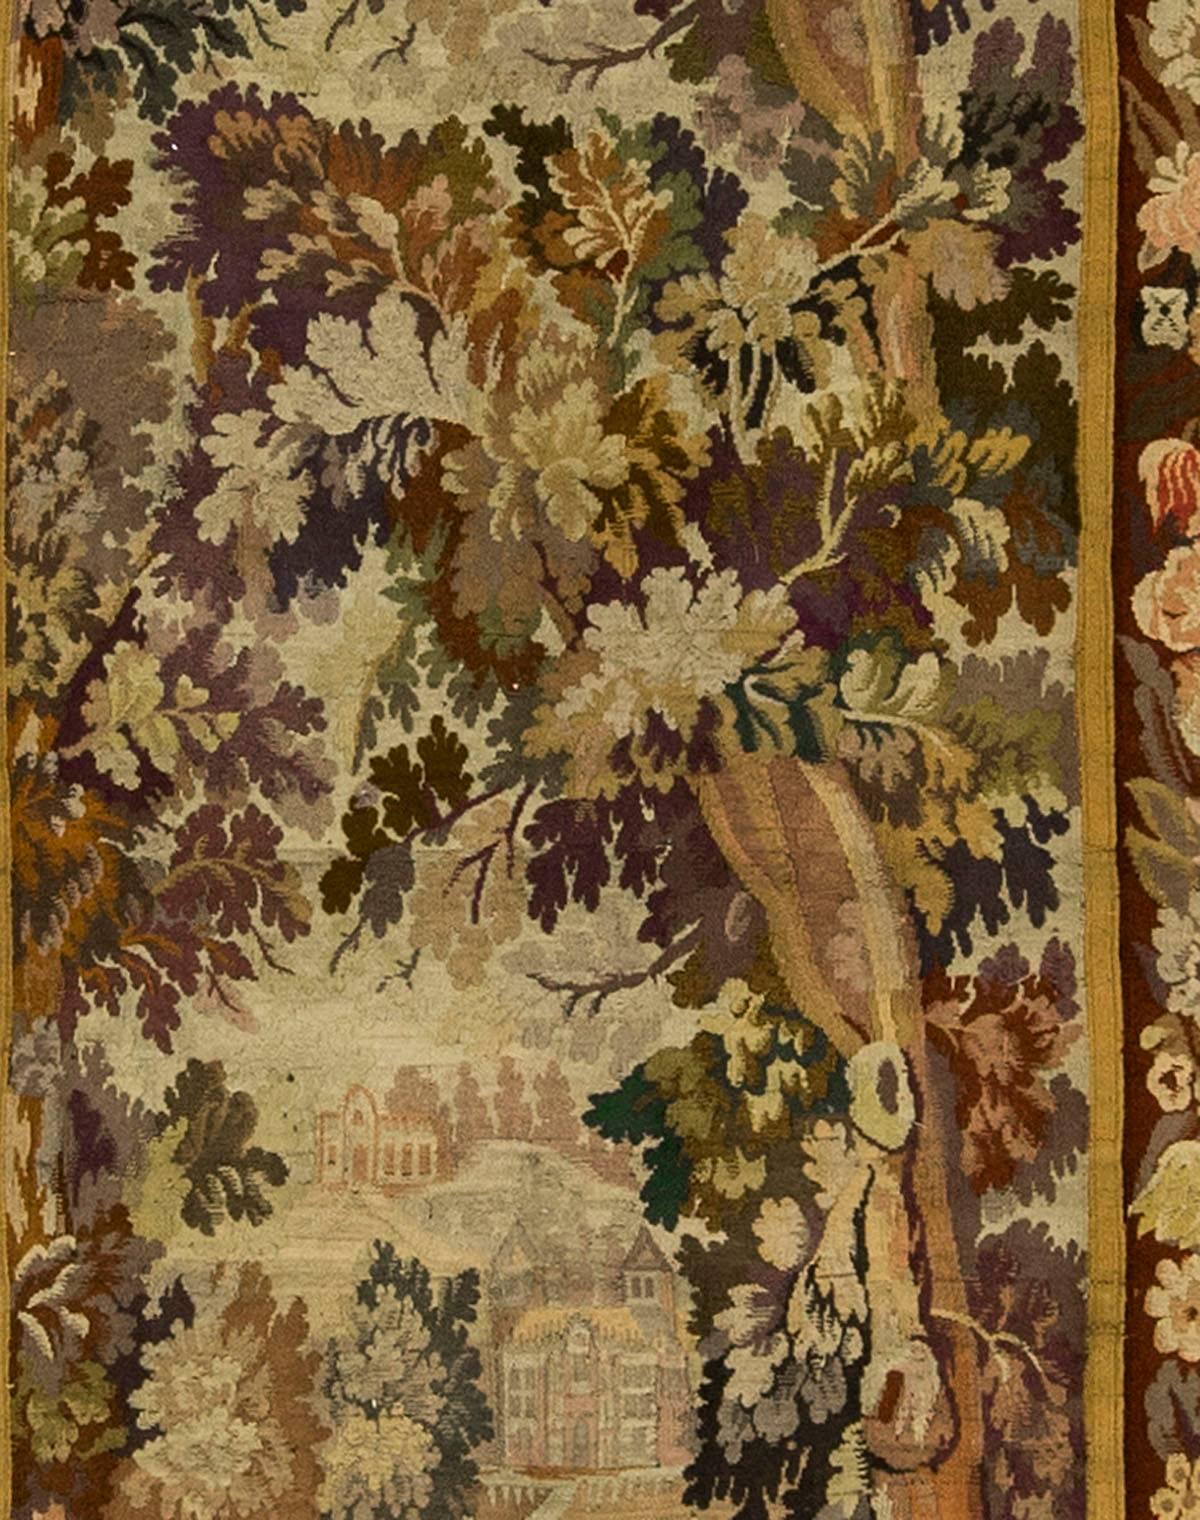 Hand-Woven 19th Century French Countryside Scene Tapestry 4'4 x 9'4 For Sale